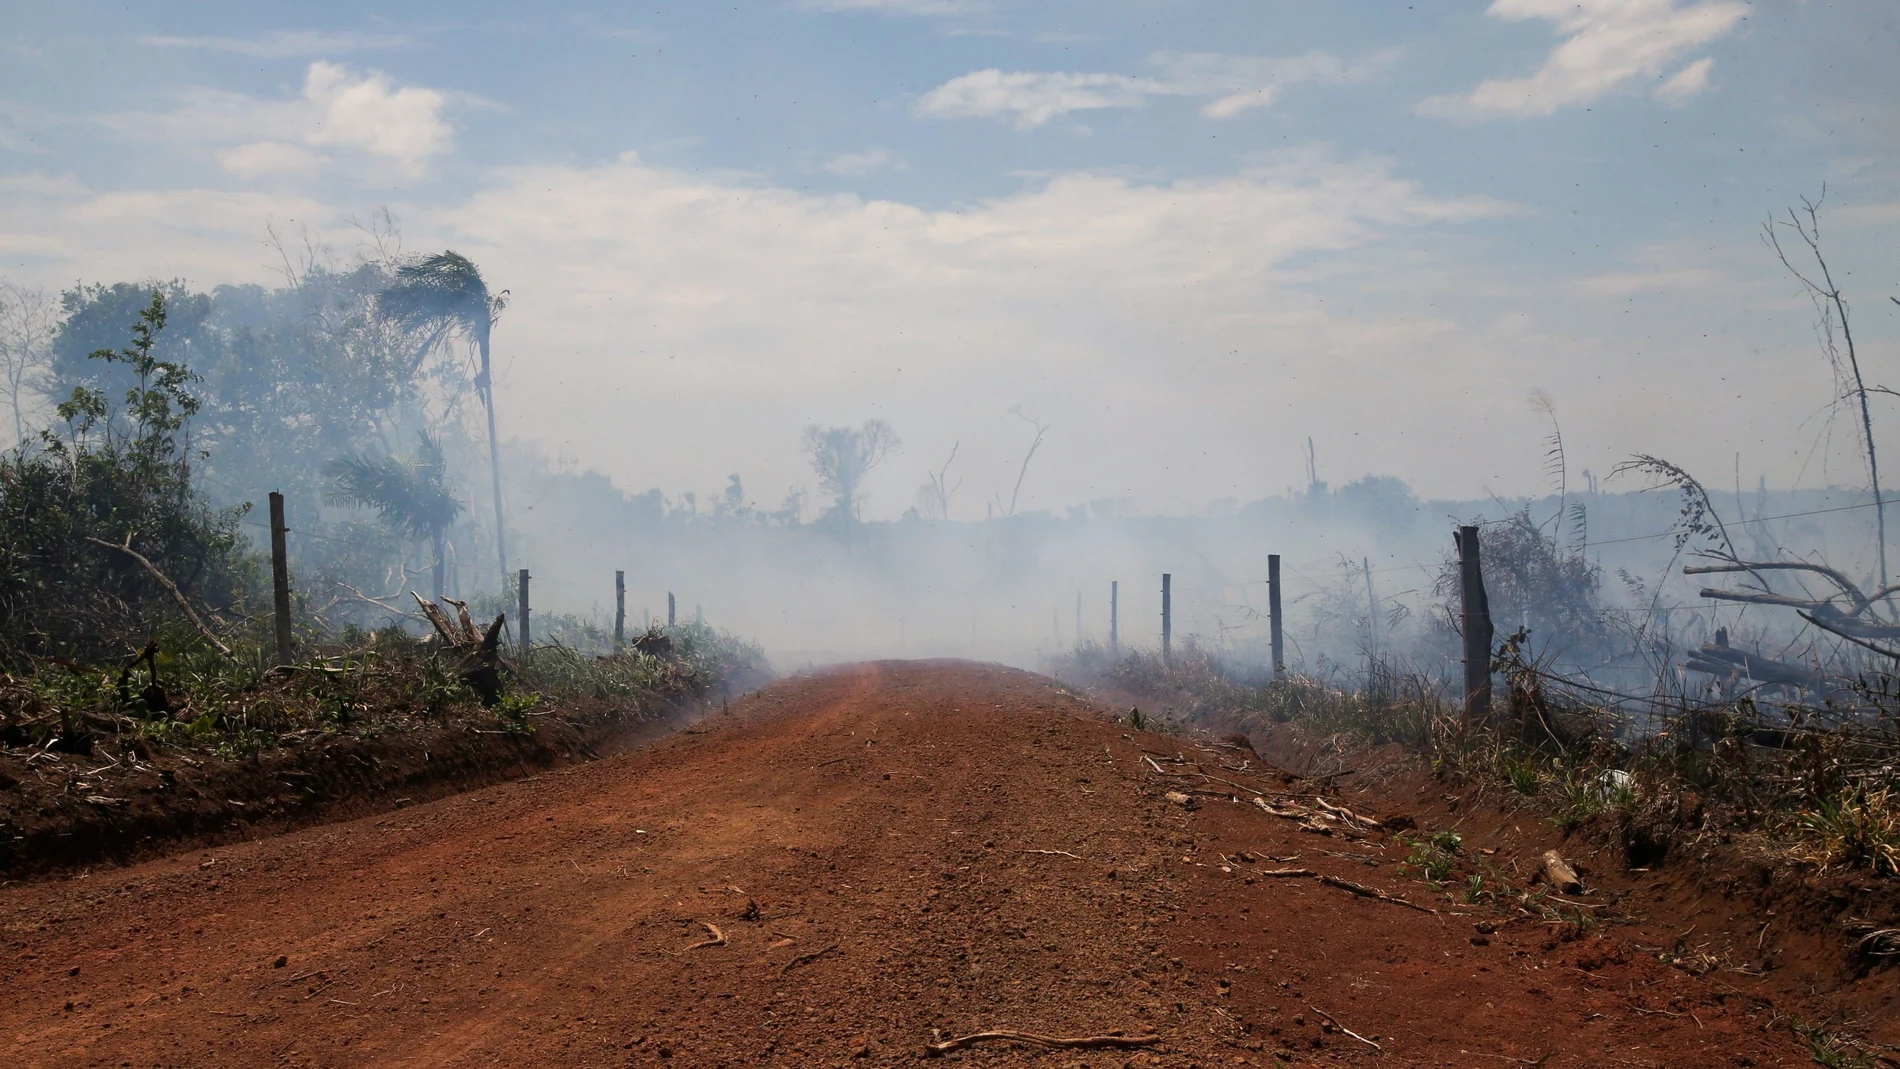 Smoke rises in the middle of an illegal road made during the deforestation of the Yari plains, in Caqueta, Colombia March 2, 2021. Picture taken March 2, 2021. REUTERS/Luisa Gonzalez